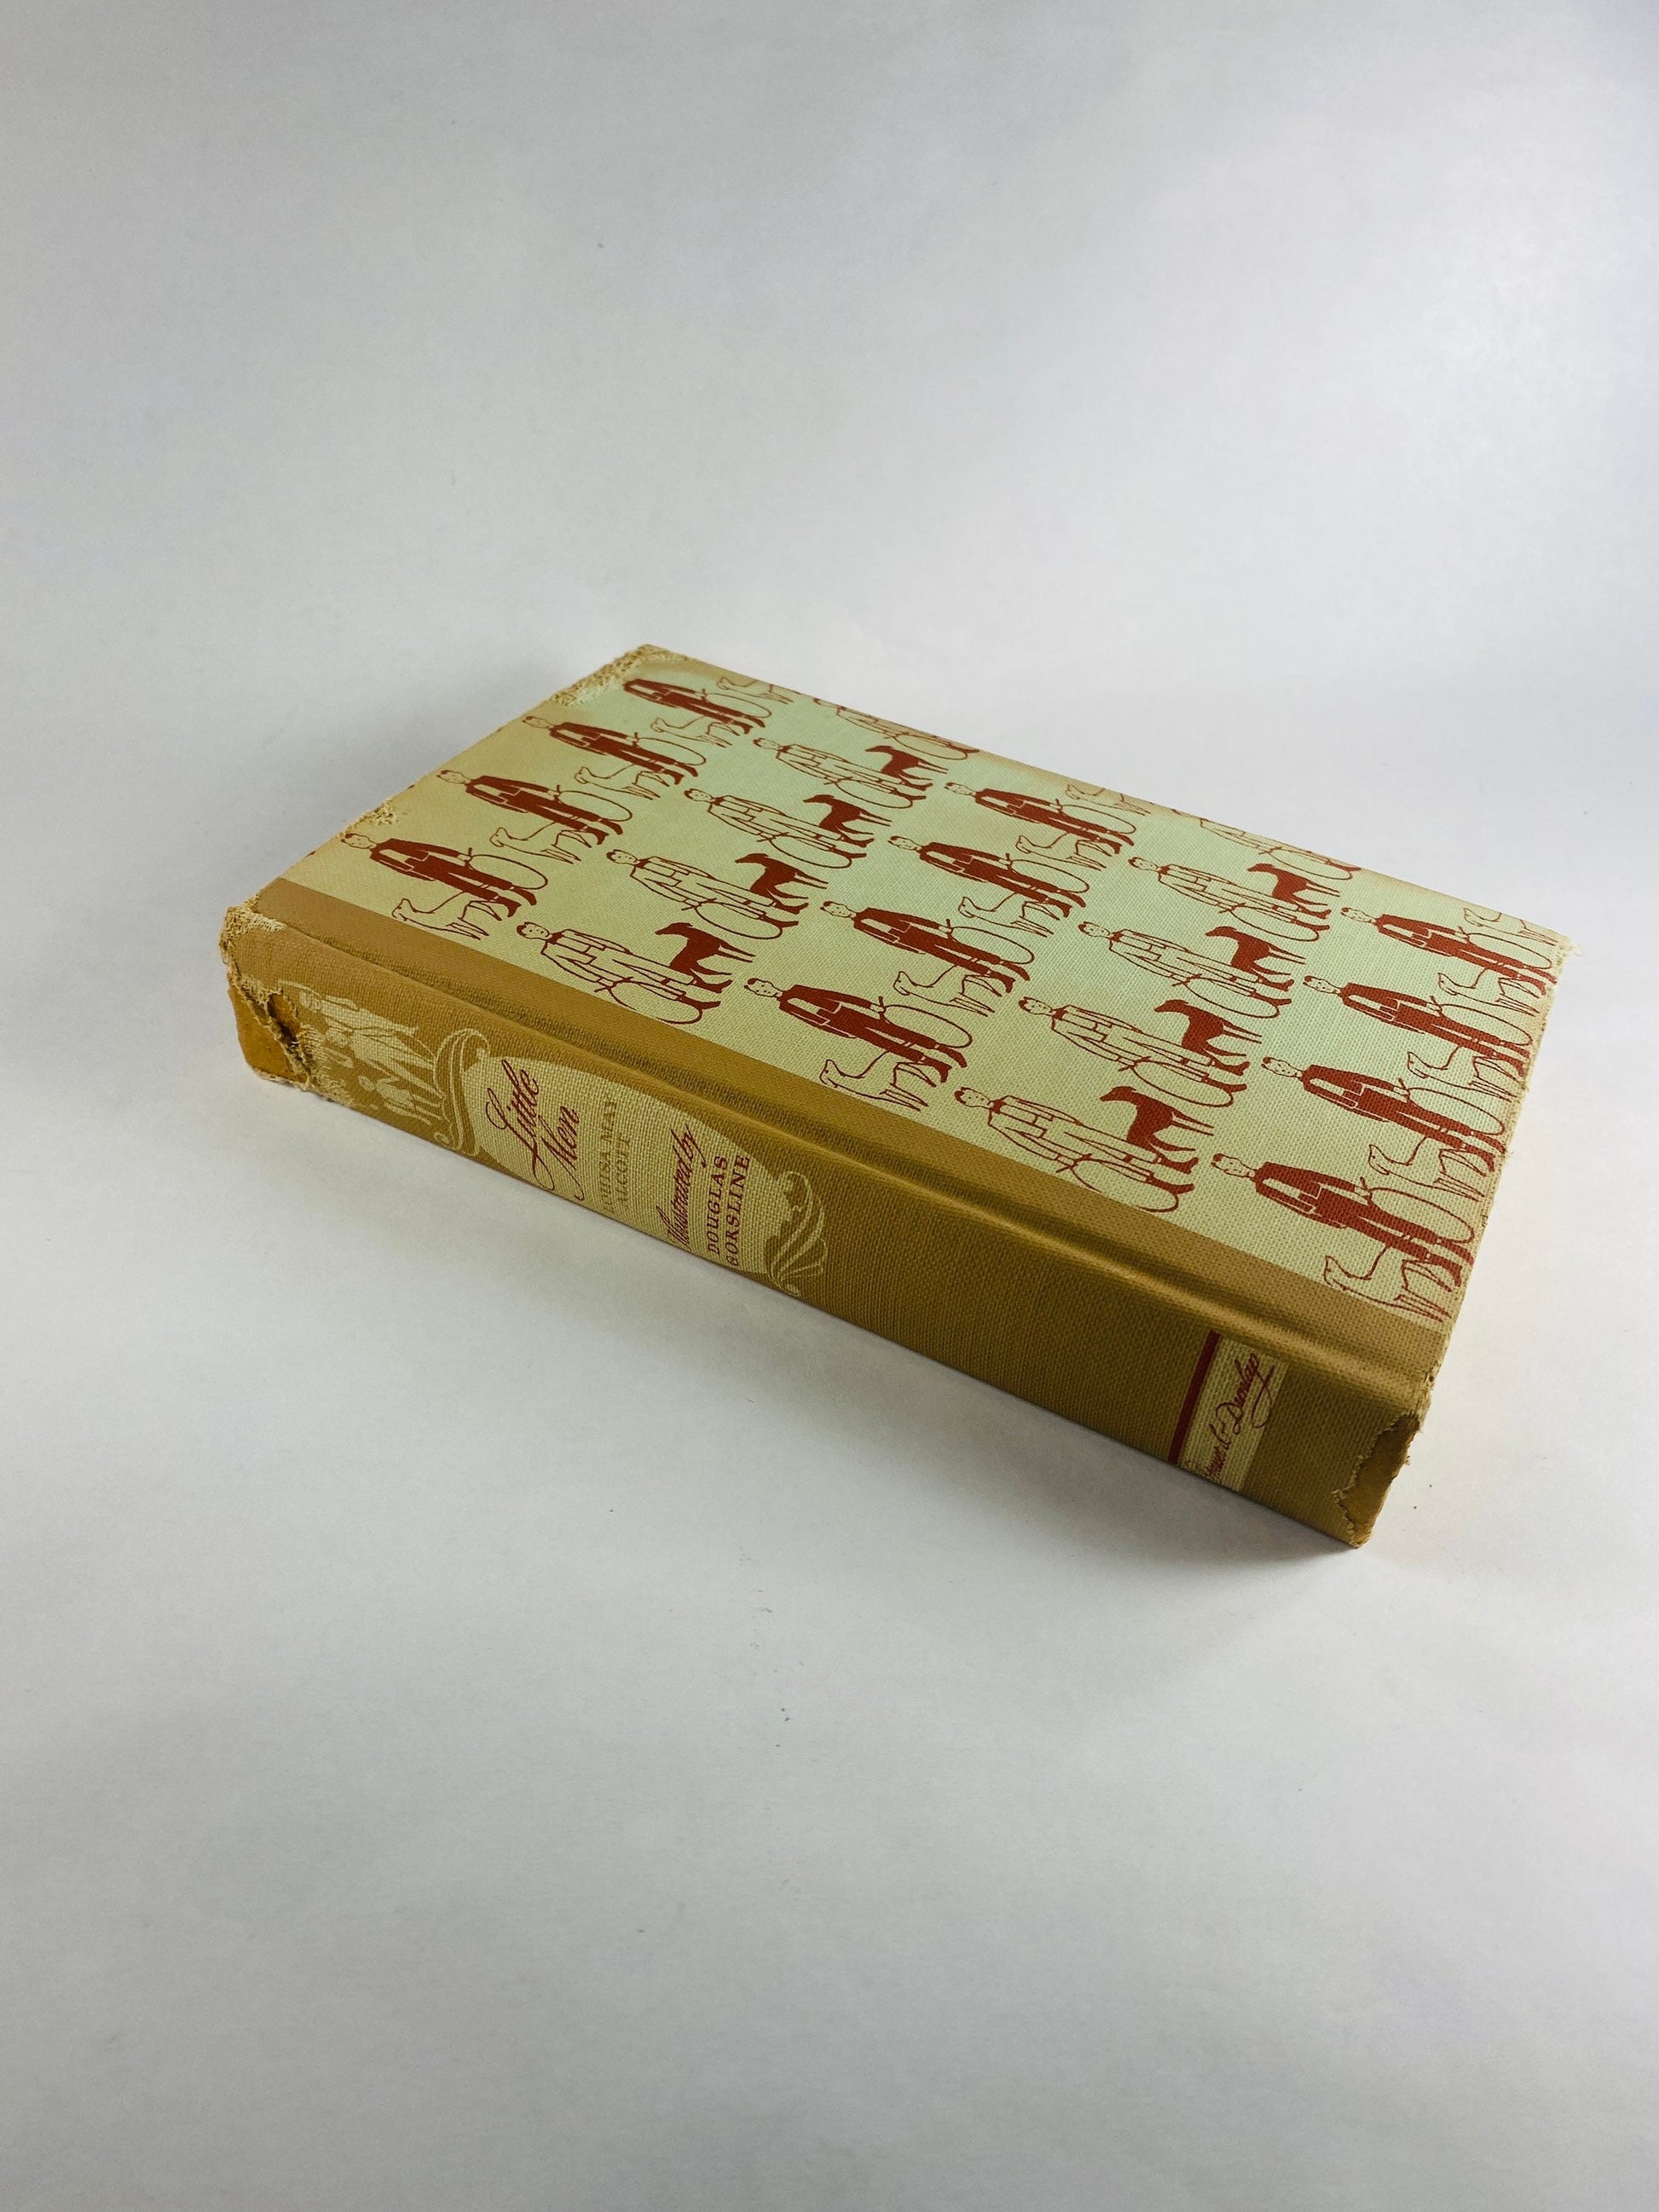 Little Men by Louisa May Alcott vintage Illustrated Children’s Library book circa 1947 with dust jacket Grosset & Dunlap